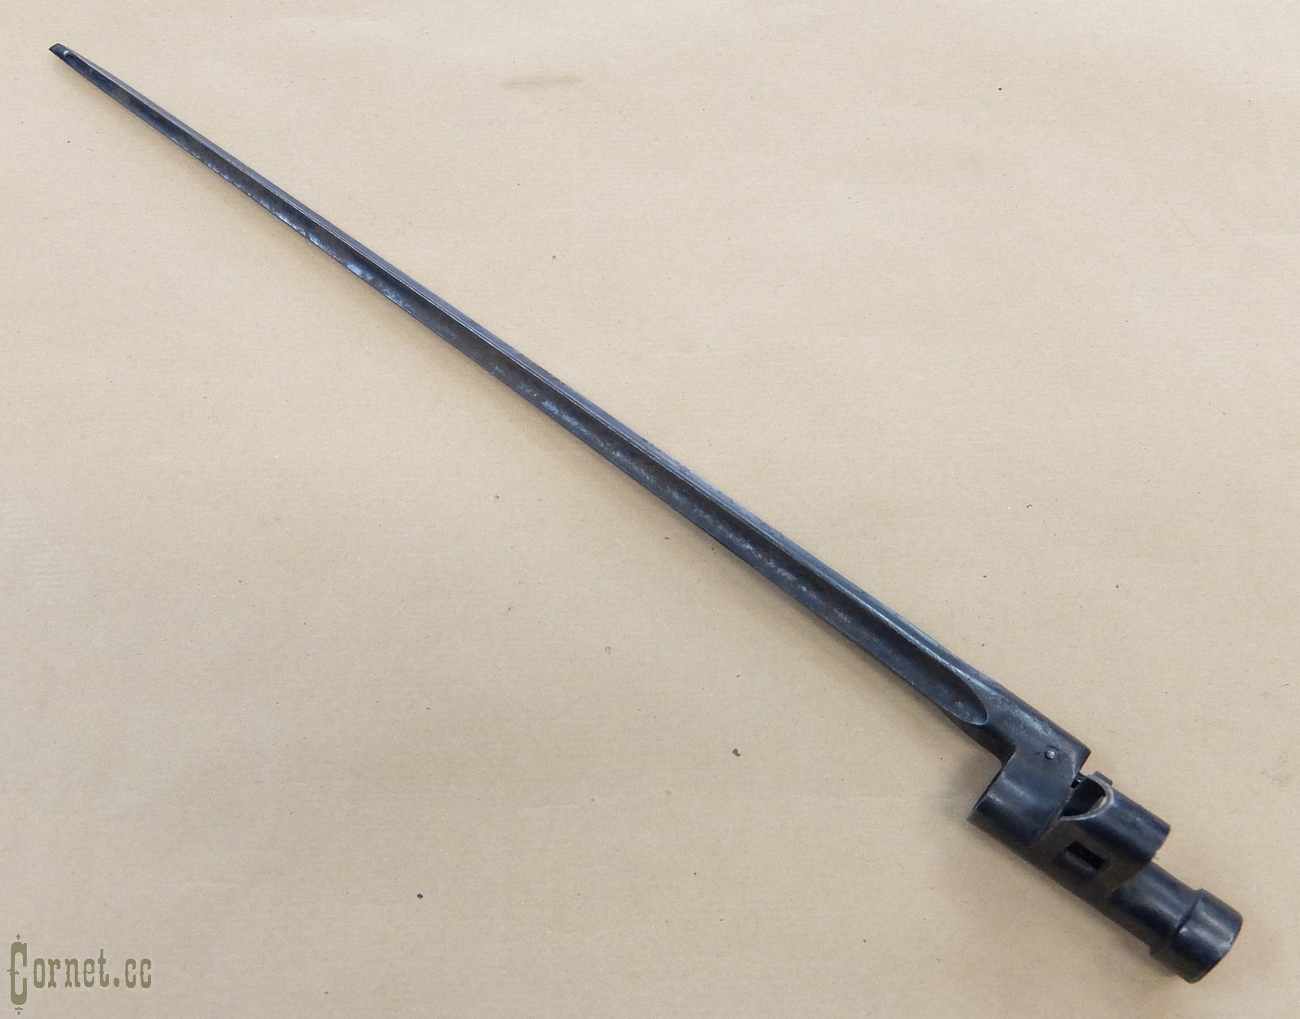 Bayonet to the Mosin system rifle with a Panshin muzzle